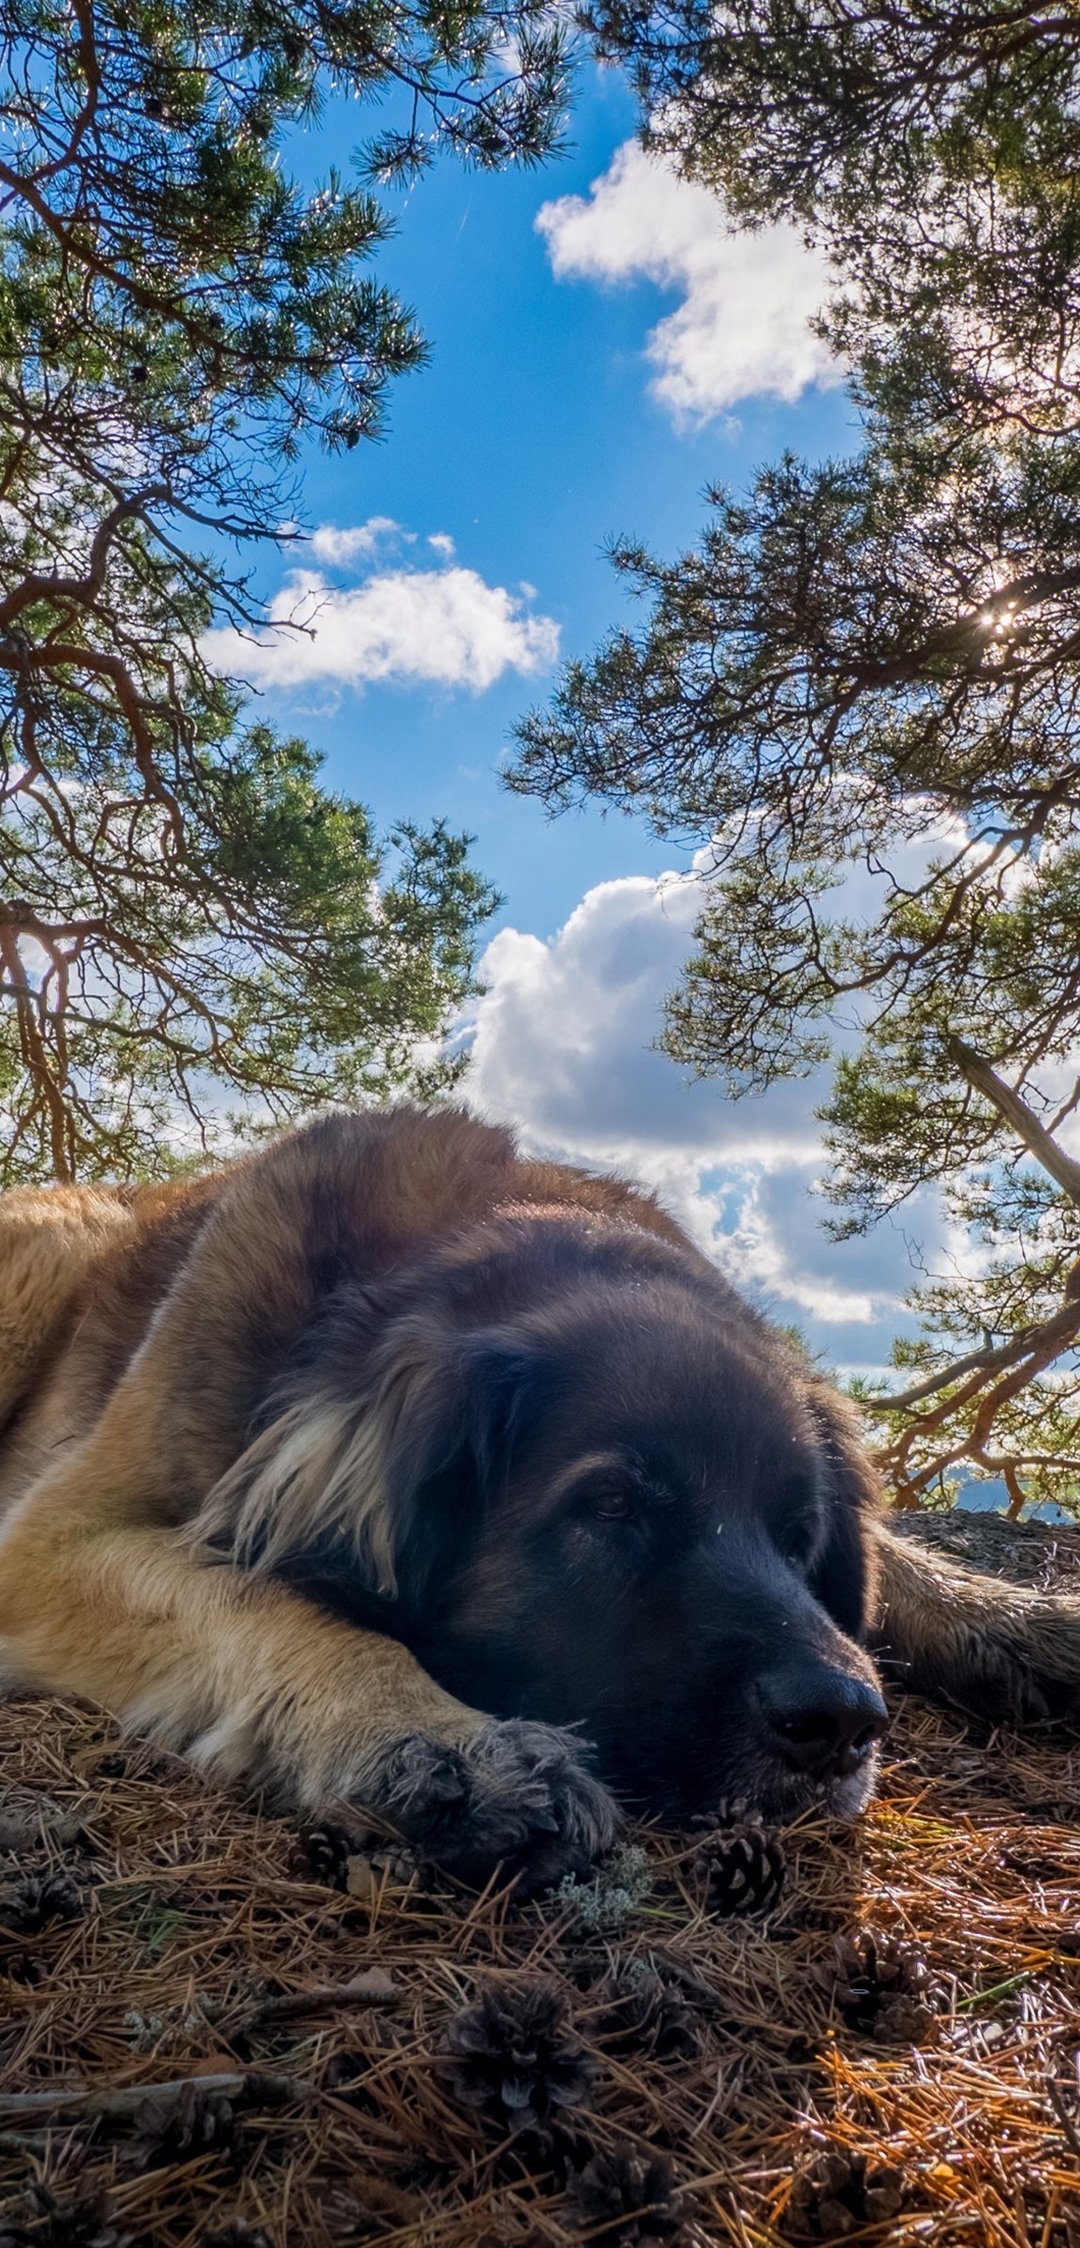 Image: Dog, lying, nature, trees, sky, clouds